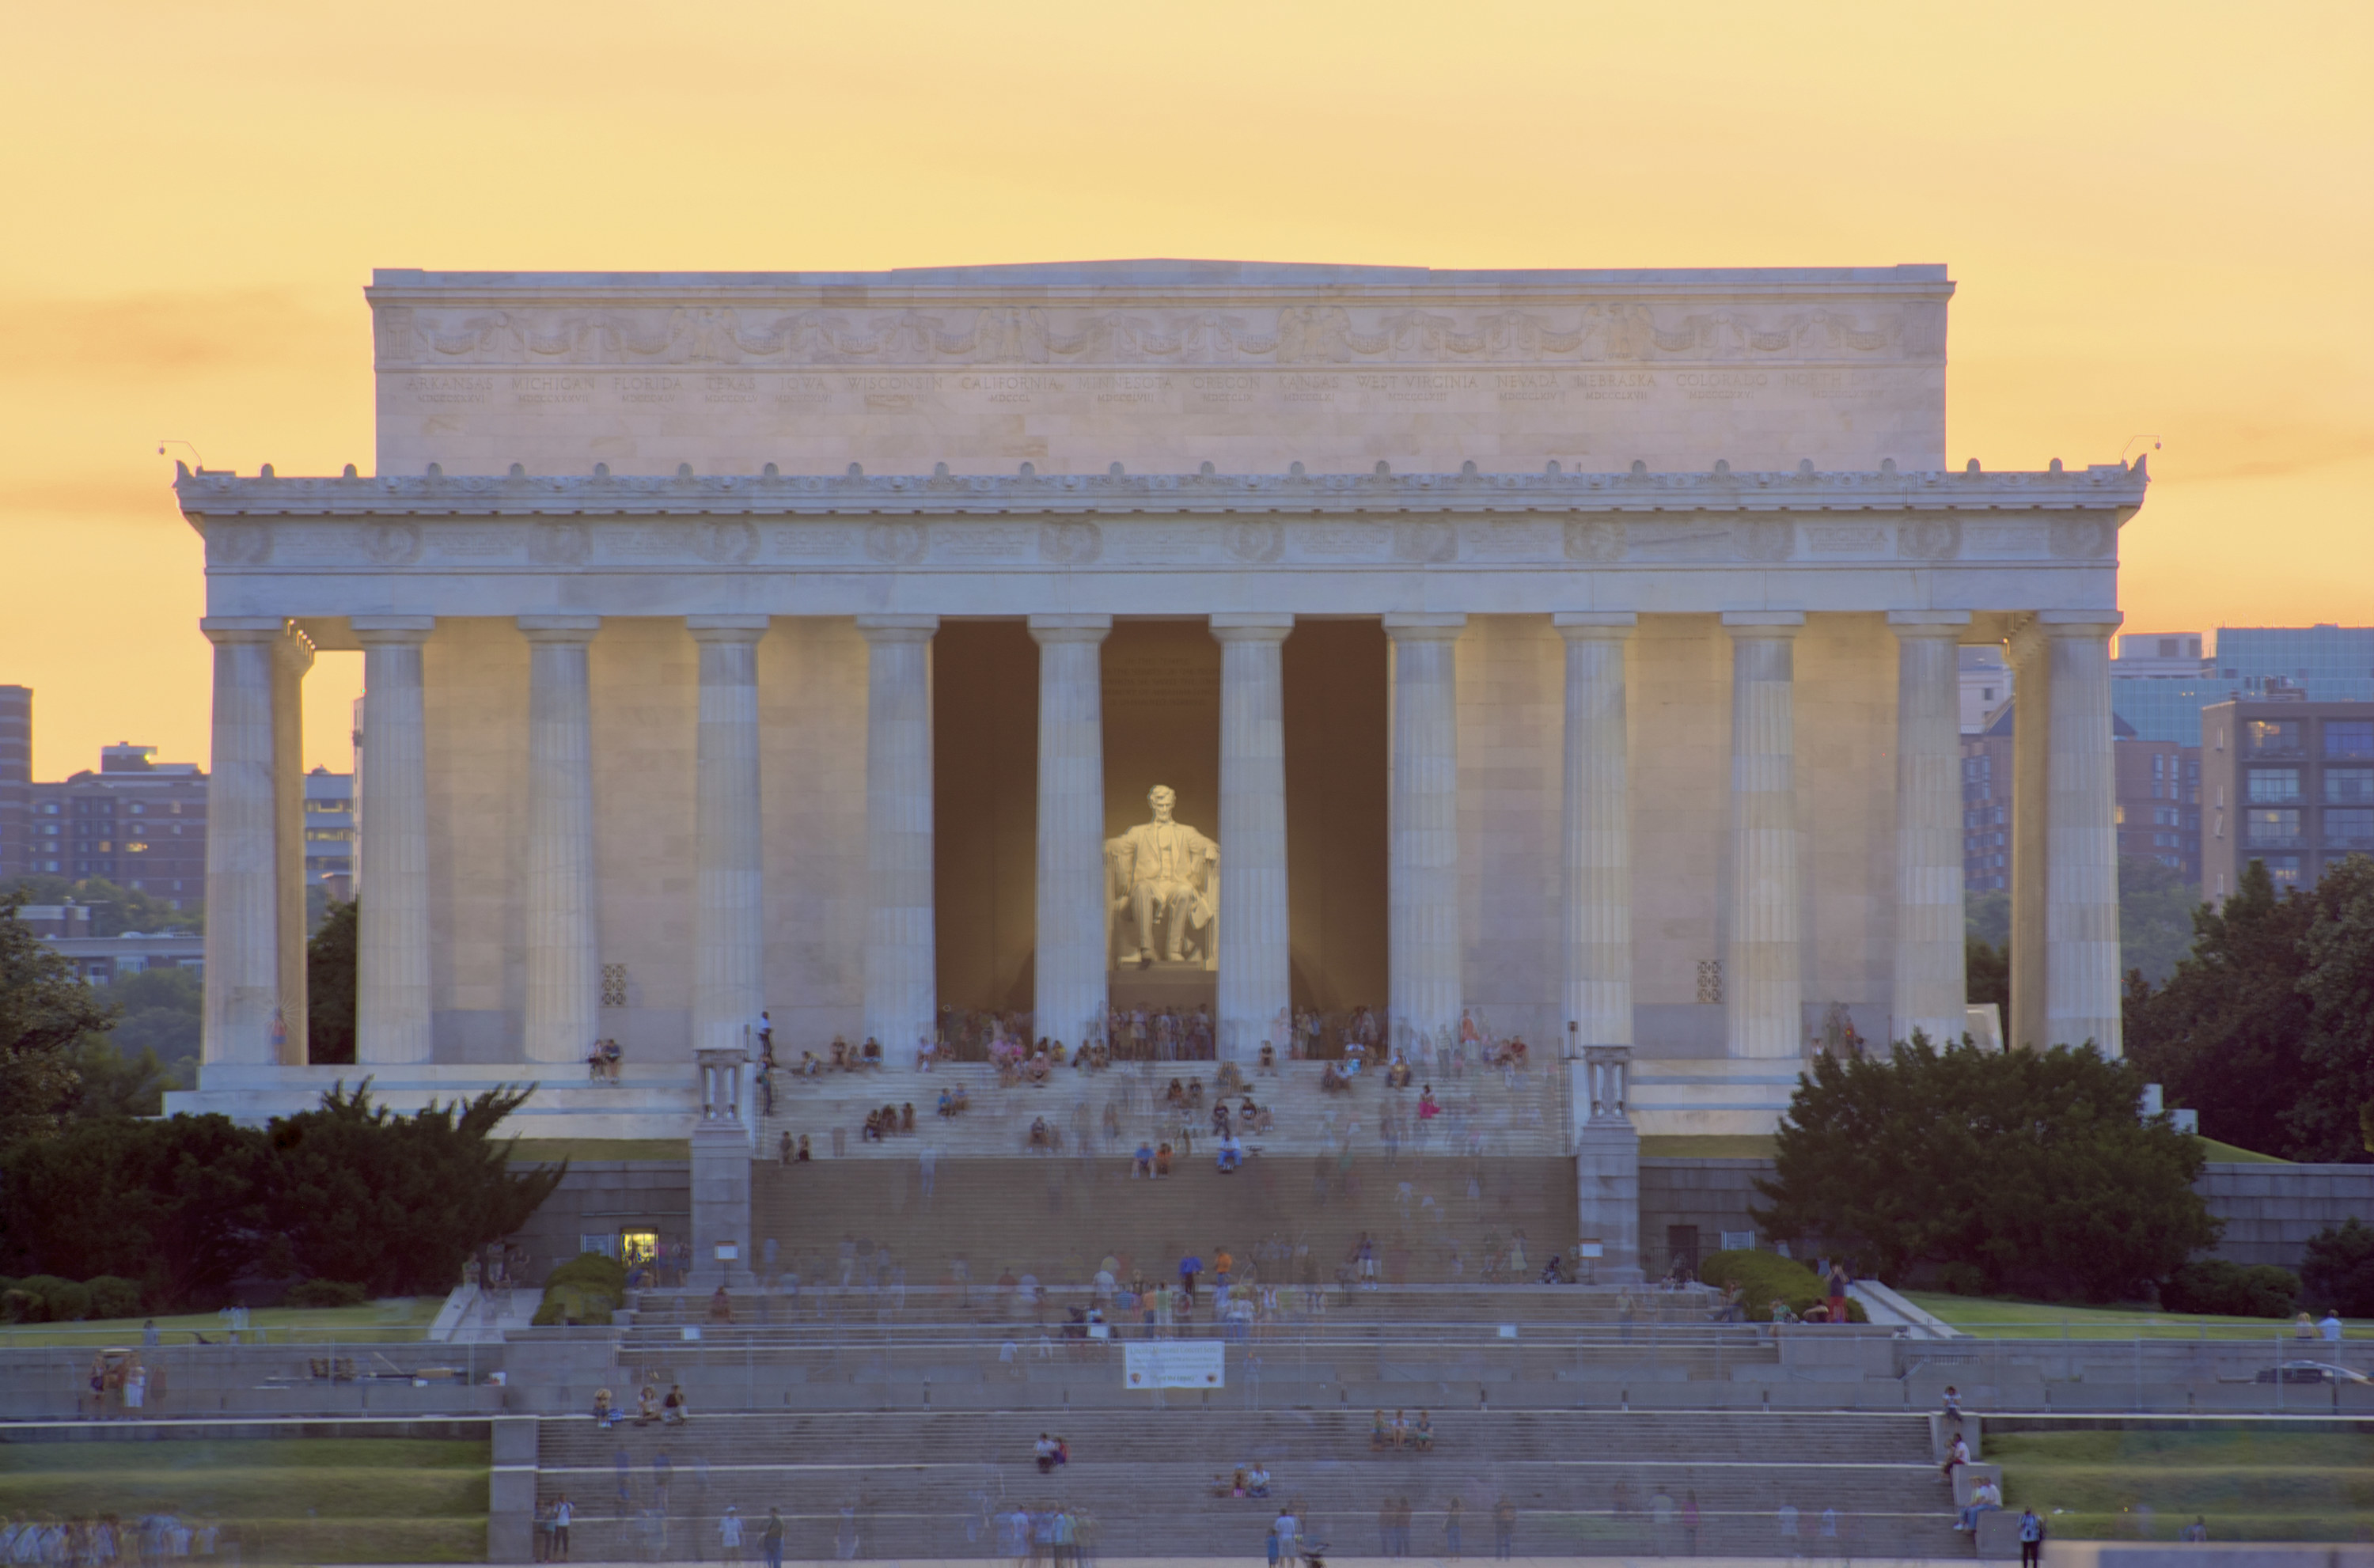 Lincoln Memorial at sunset with many people sitting and standing on its steps